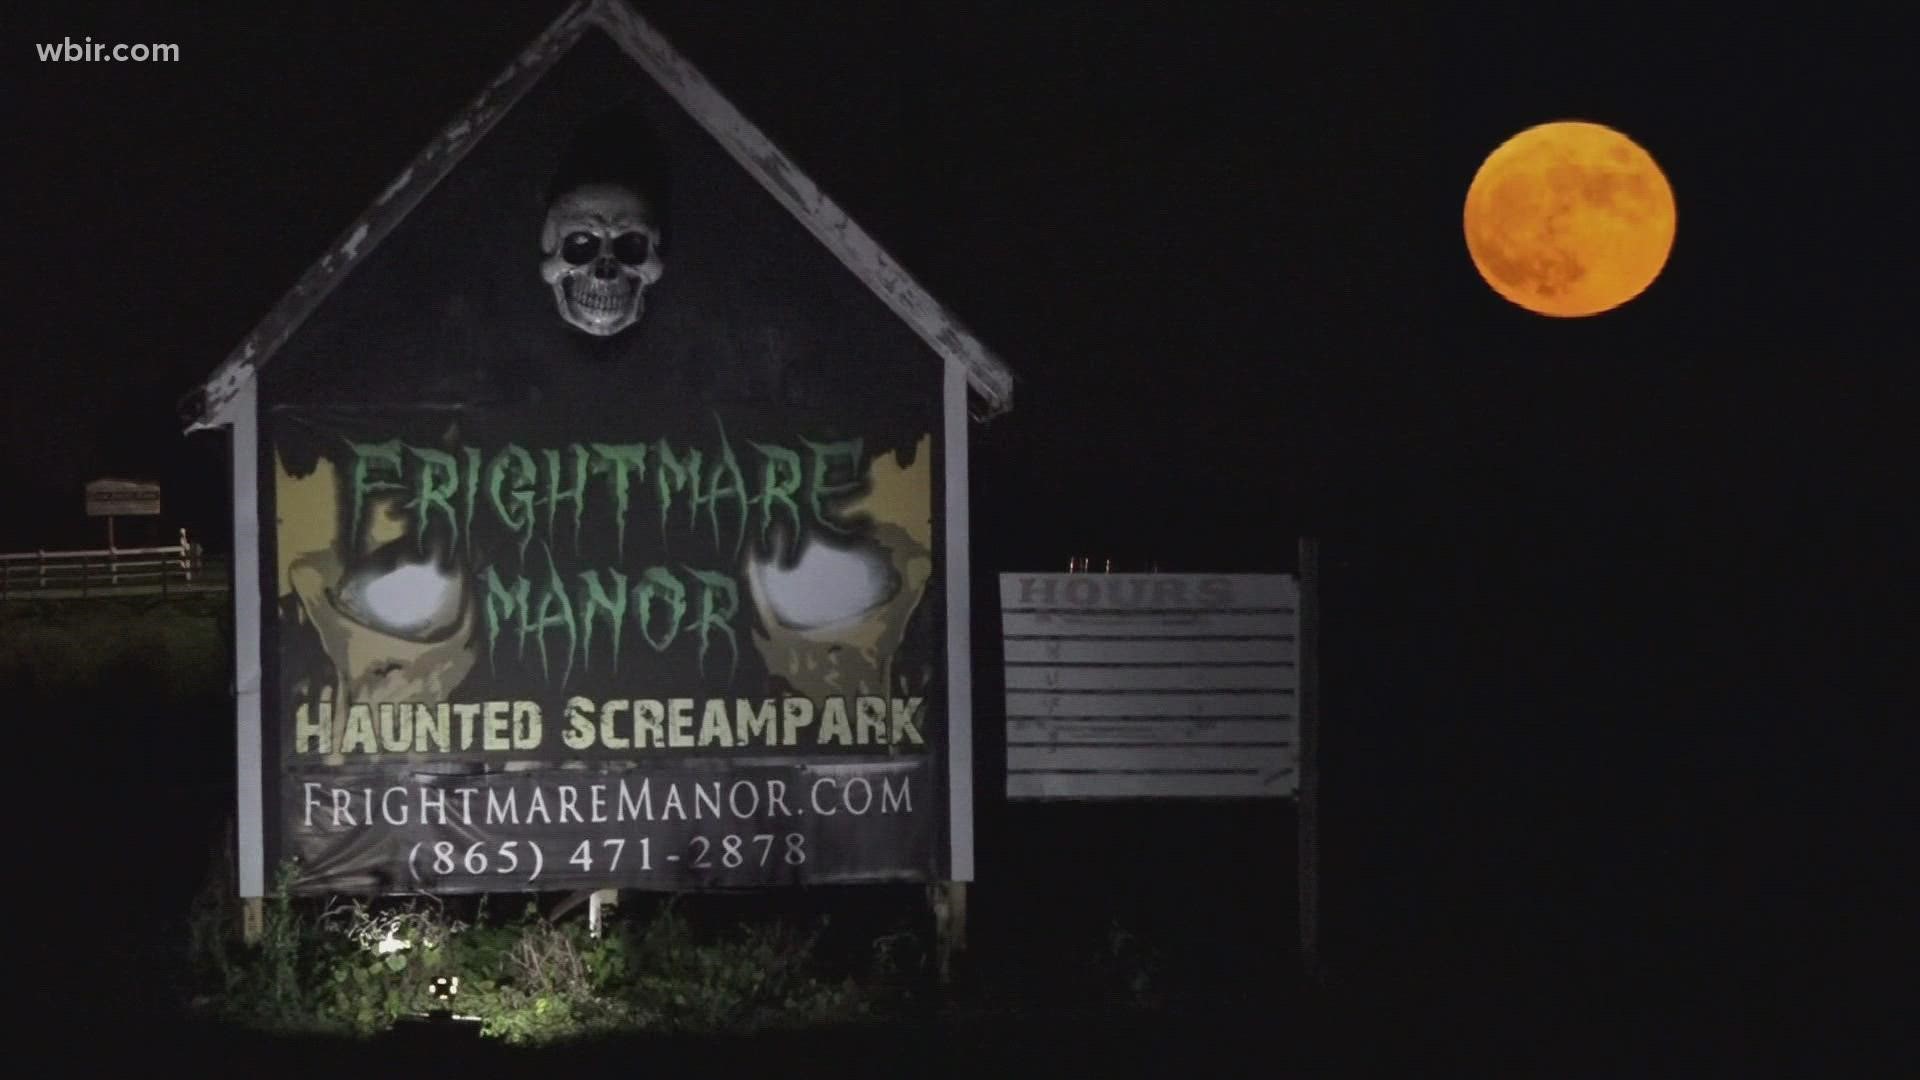 The old house Frightmare Manor calls home has a dark past, and for 13 years, visitors have paid to get scared there.